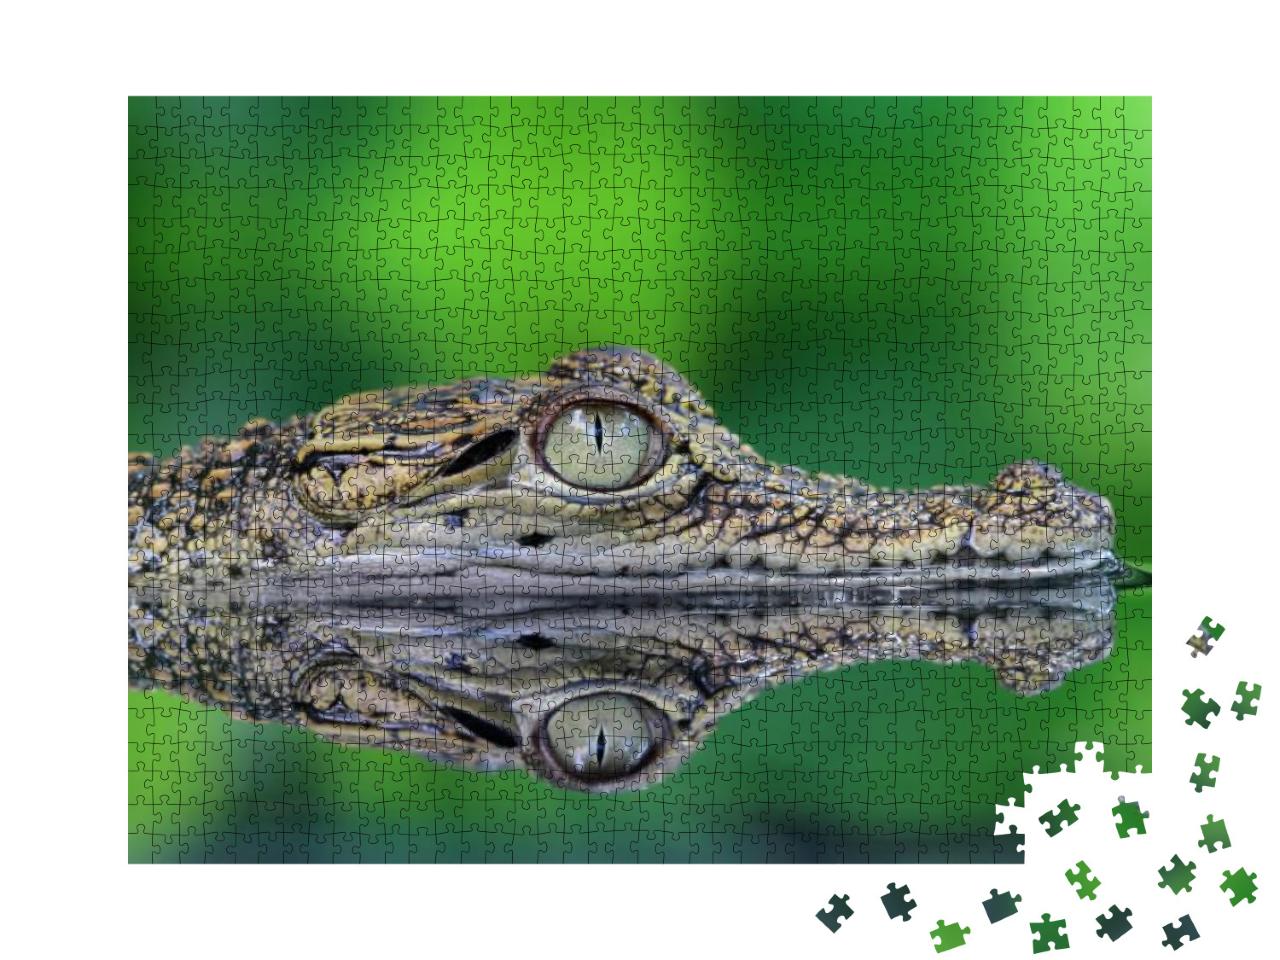 Crocodile, Crocodile in Reflection... Jigsaw Puzzle with 1000 pieces